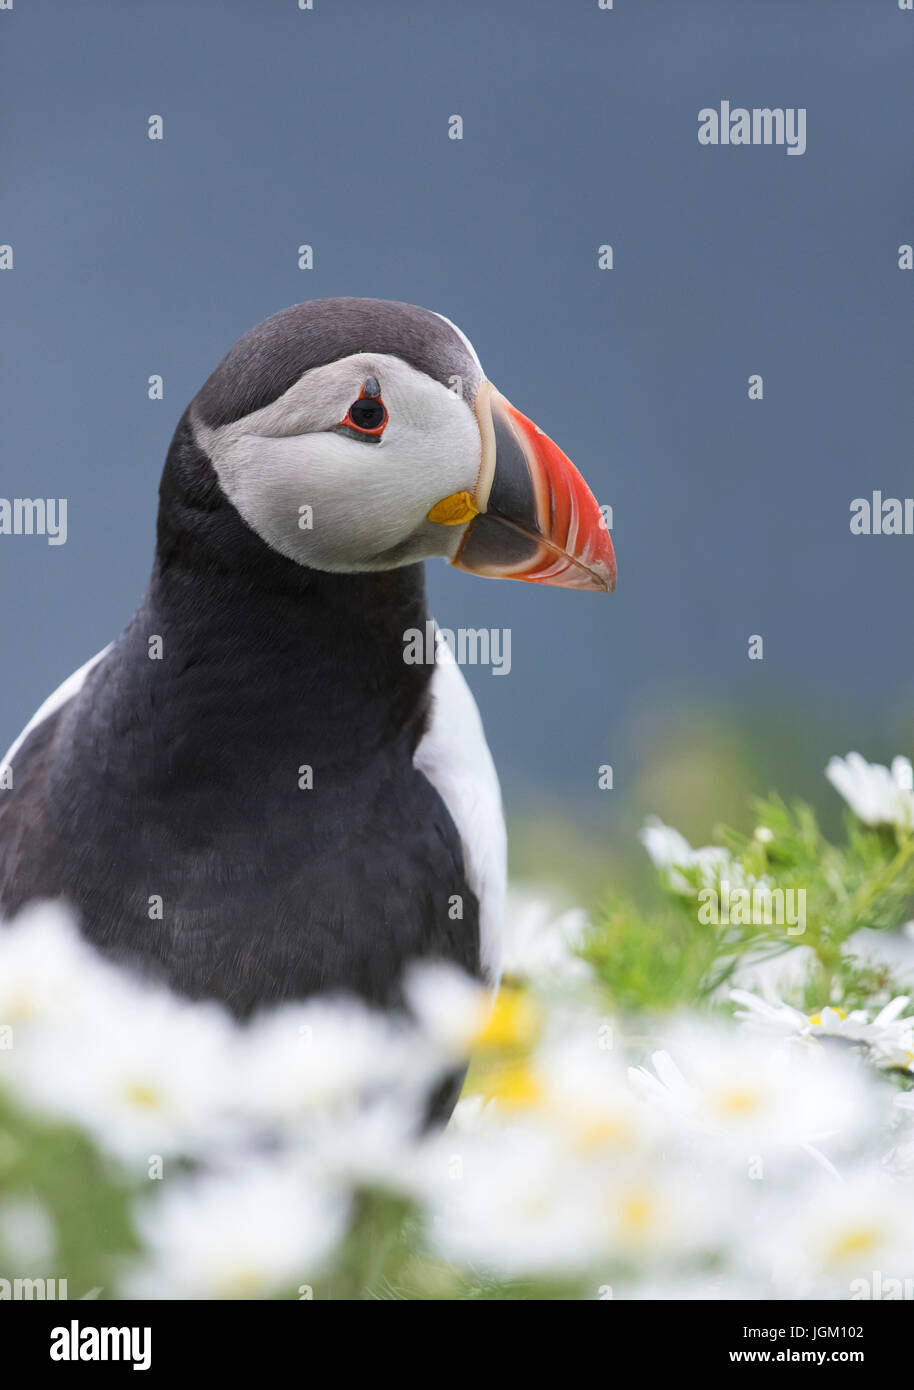 A Puffin (Fratercula arctica) perched amongst the cliff top daisies, Shetland, UK Stock Photo